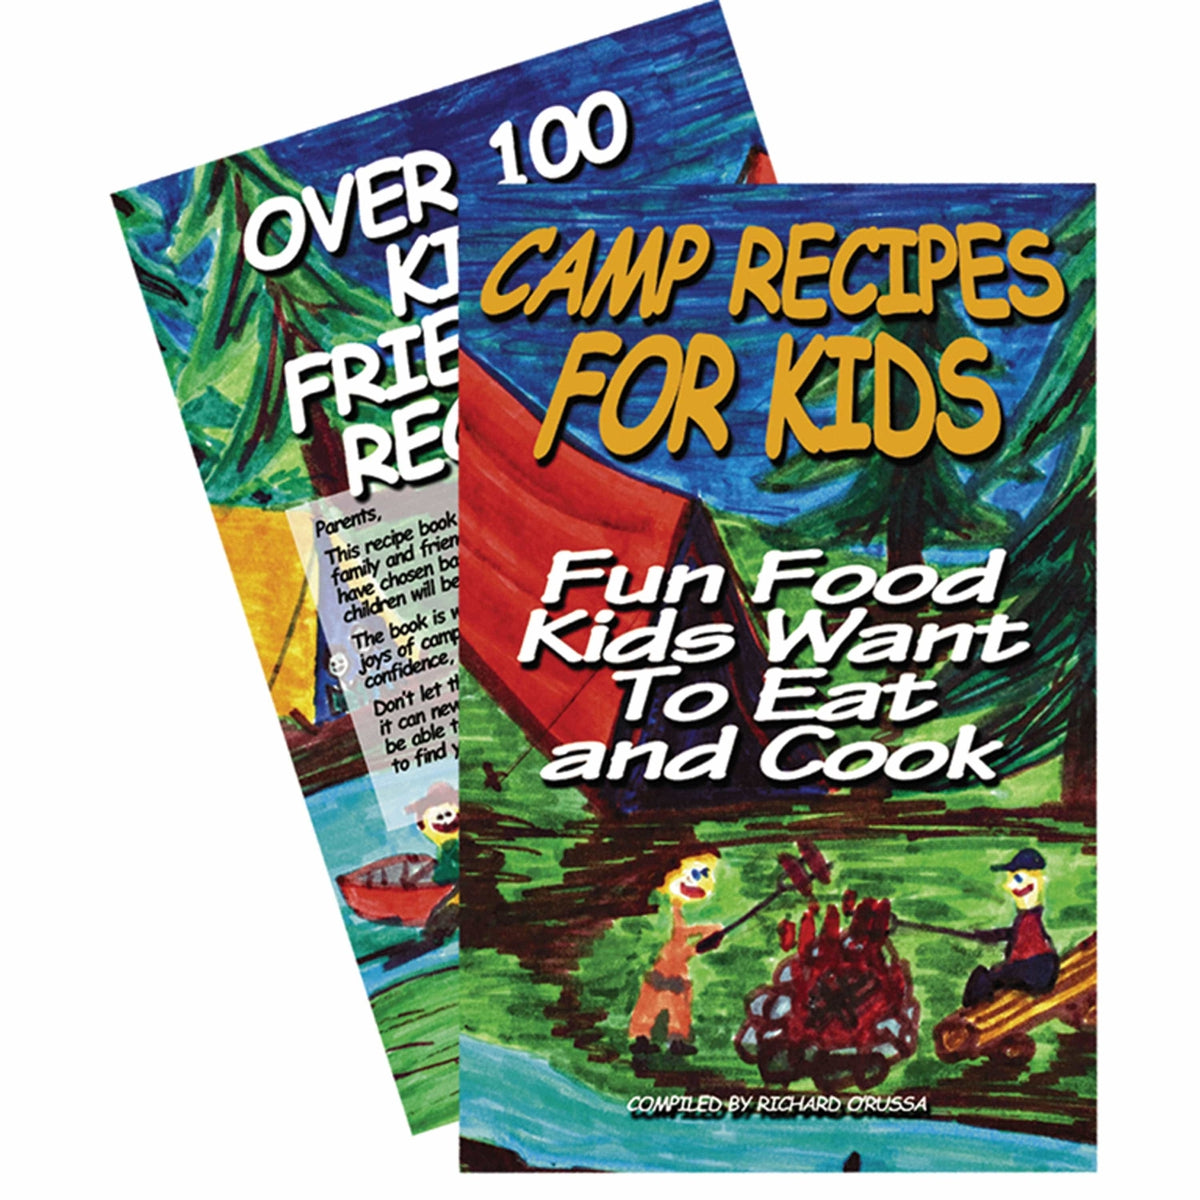 Rome Industries Qualifies for Free Shipping Rome Industries Camp Recipes for Kids By Richard O'Russa #2015